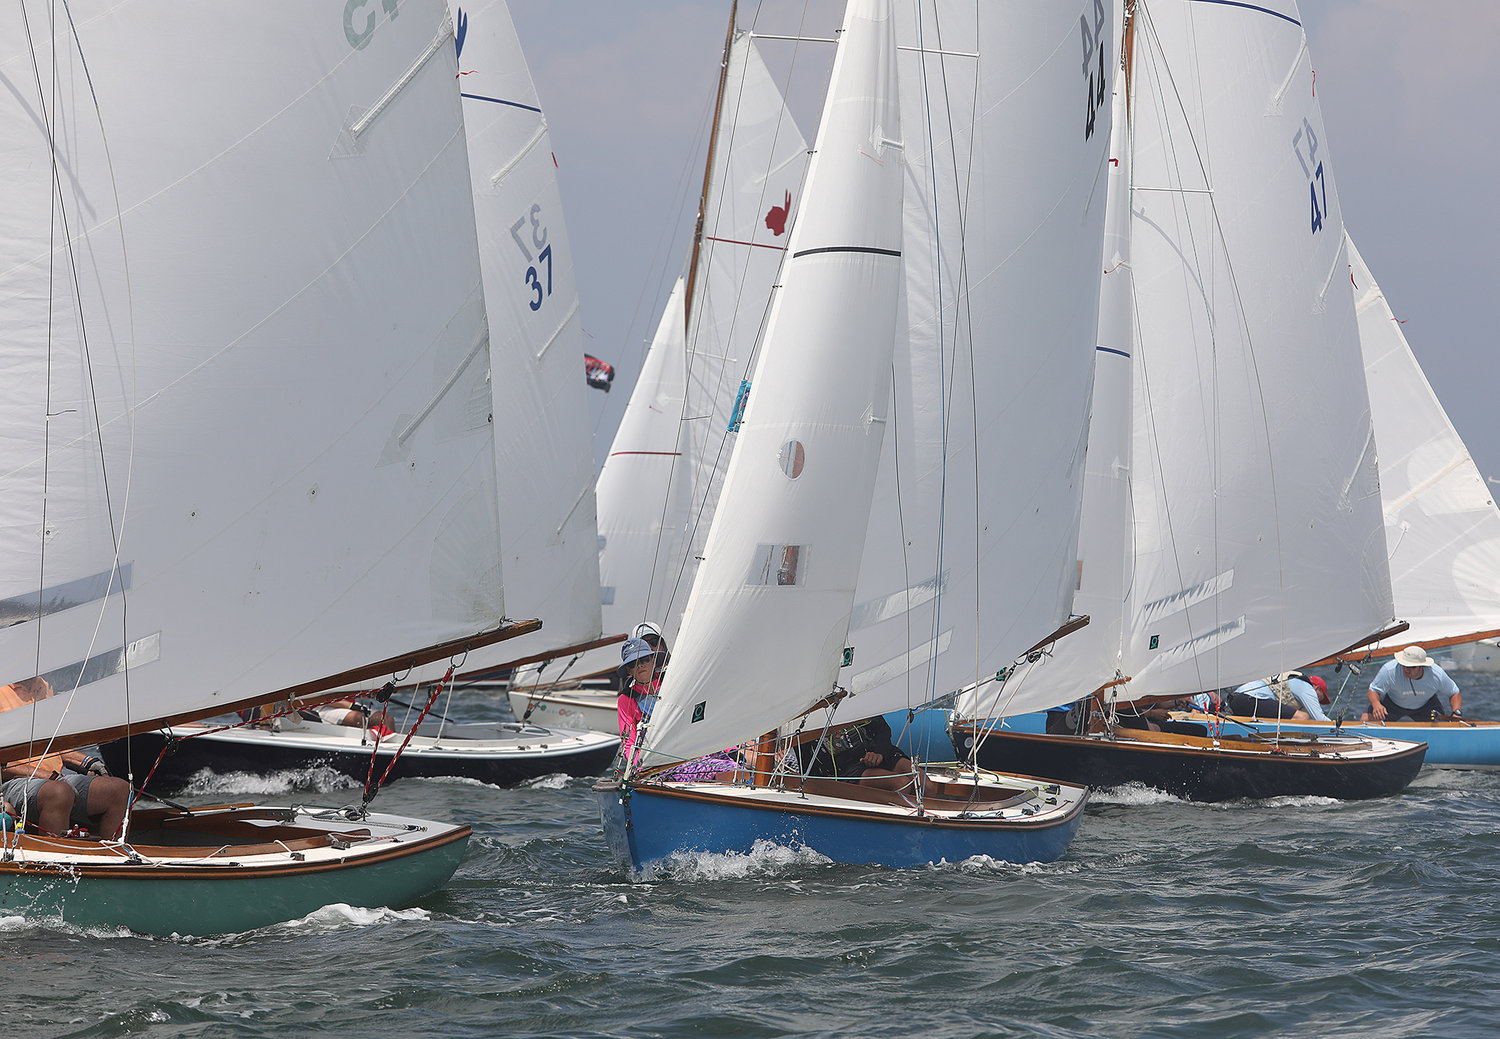 Indians after the start of the One Design Regatta in Nantucket Harbor on the opening day of Race Week 2021.